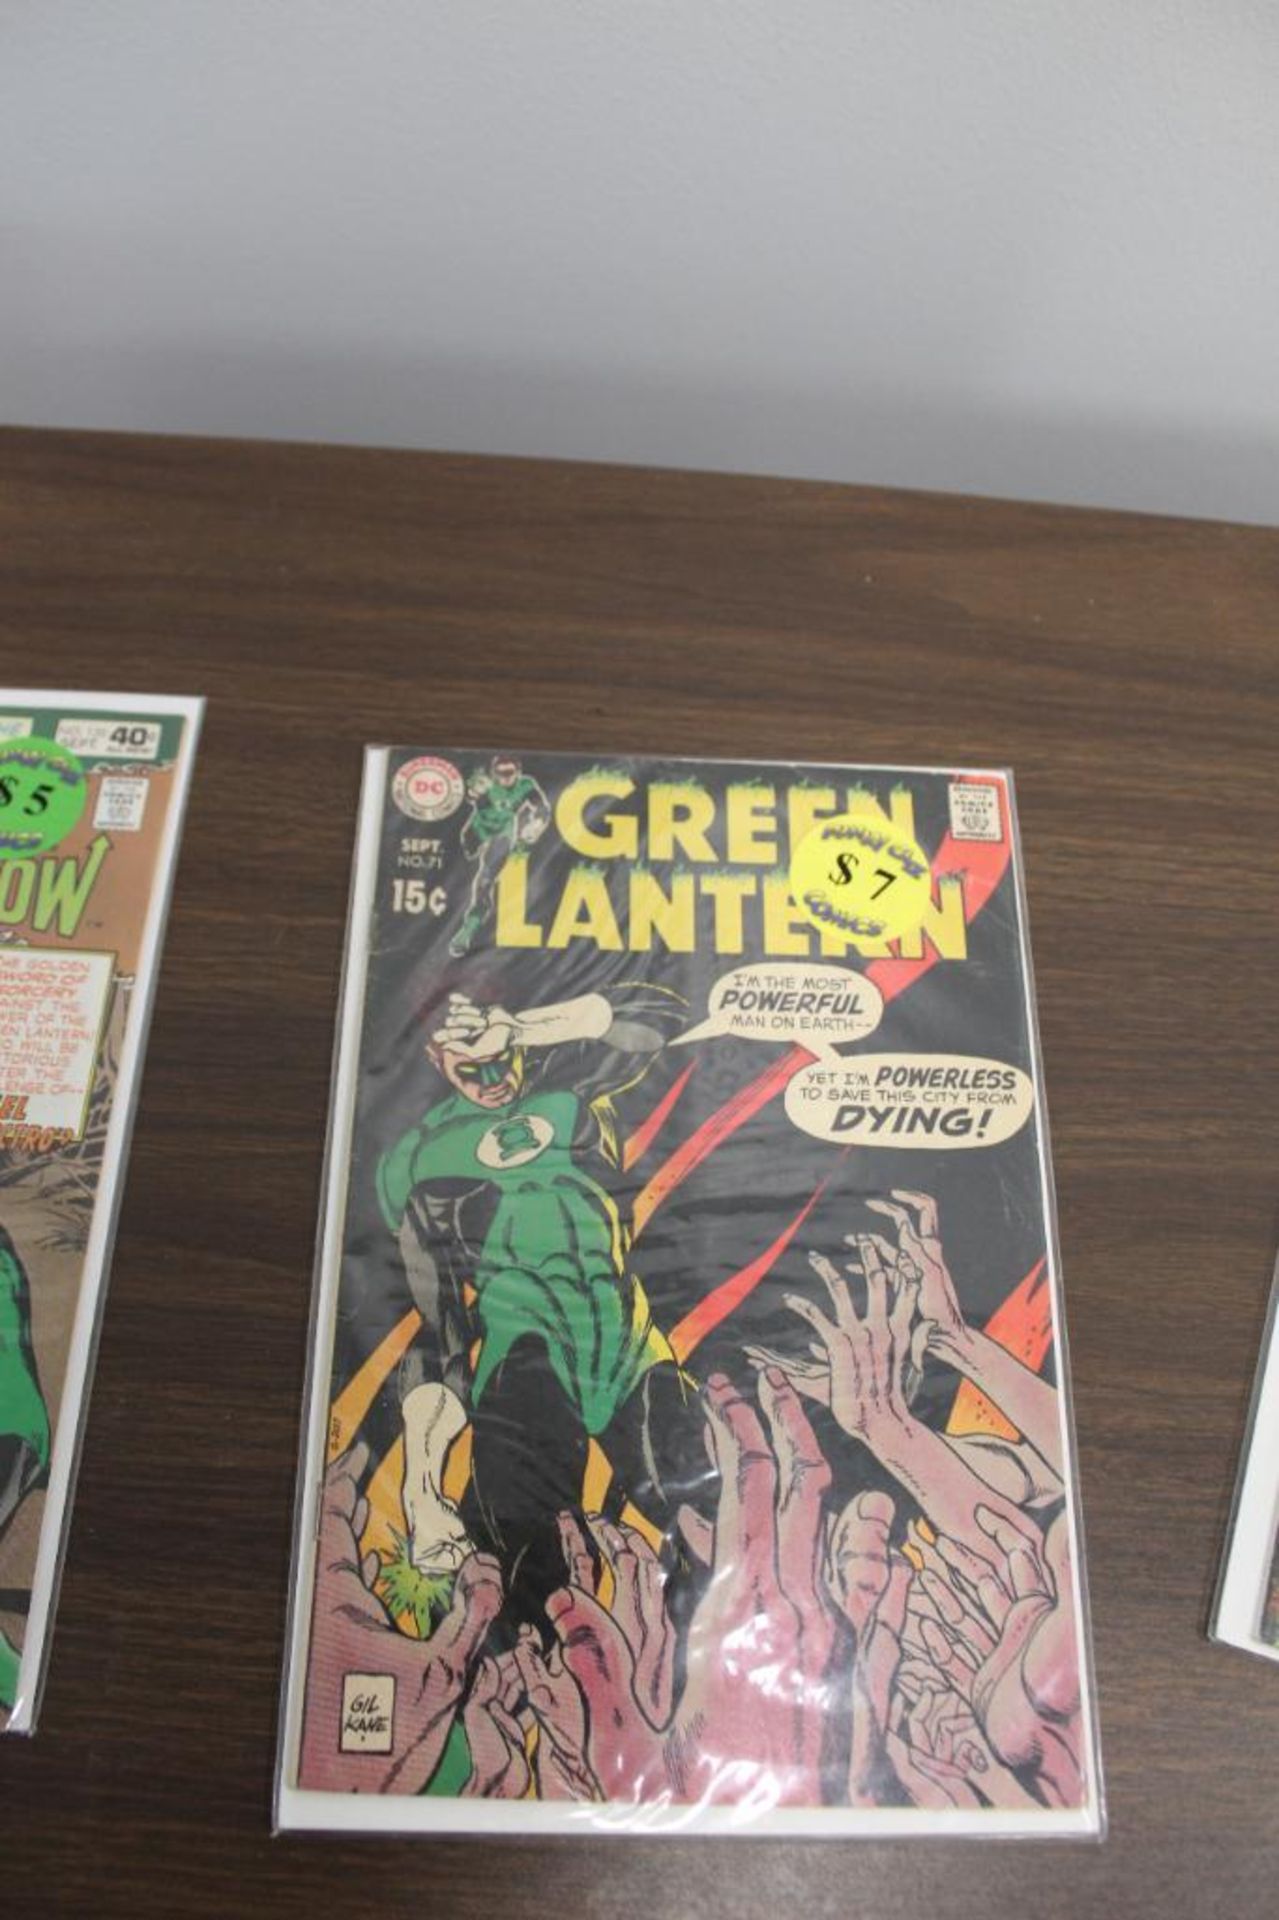 Lot of Comics - Green Lantern and Other Grapic Novels - Image 8 of 11